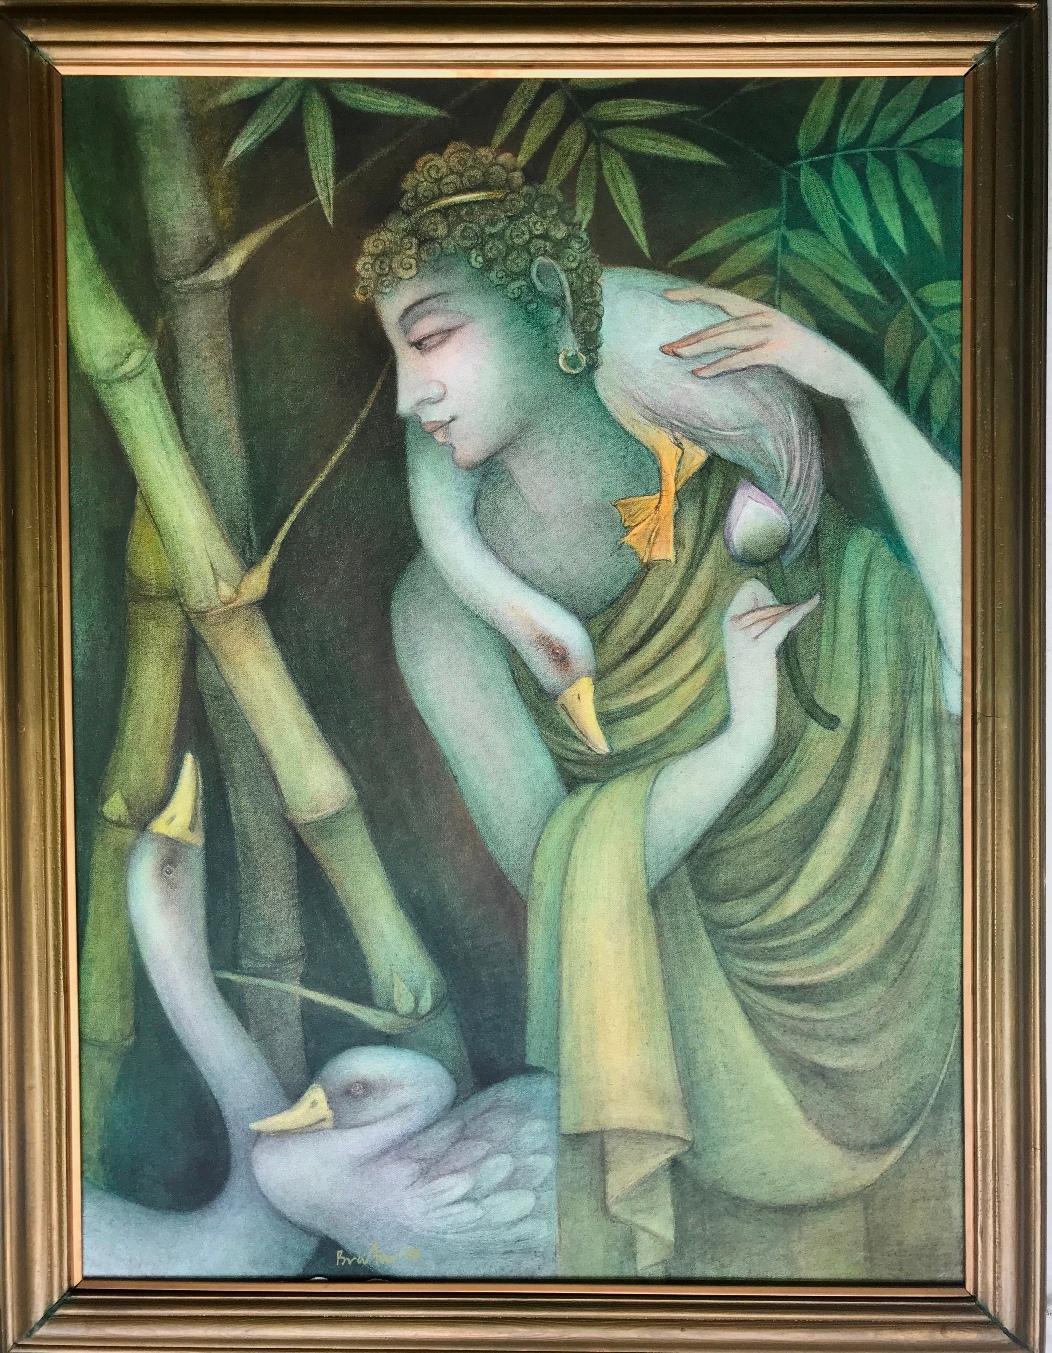 Enlightened Purusha, Tempera on Canvas by Contemporary Artist "In Stock"